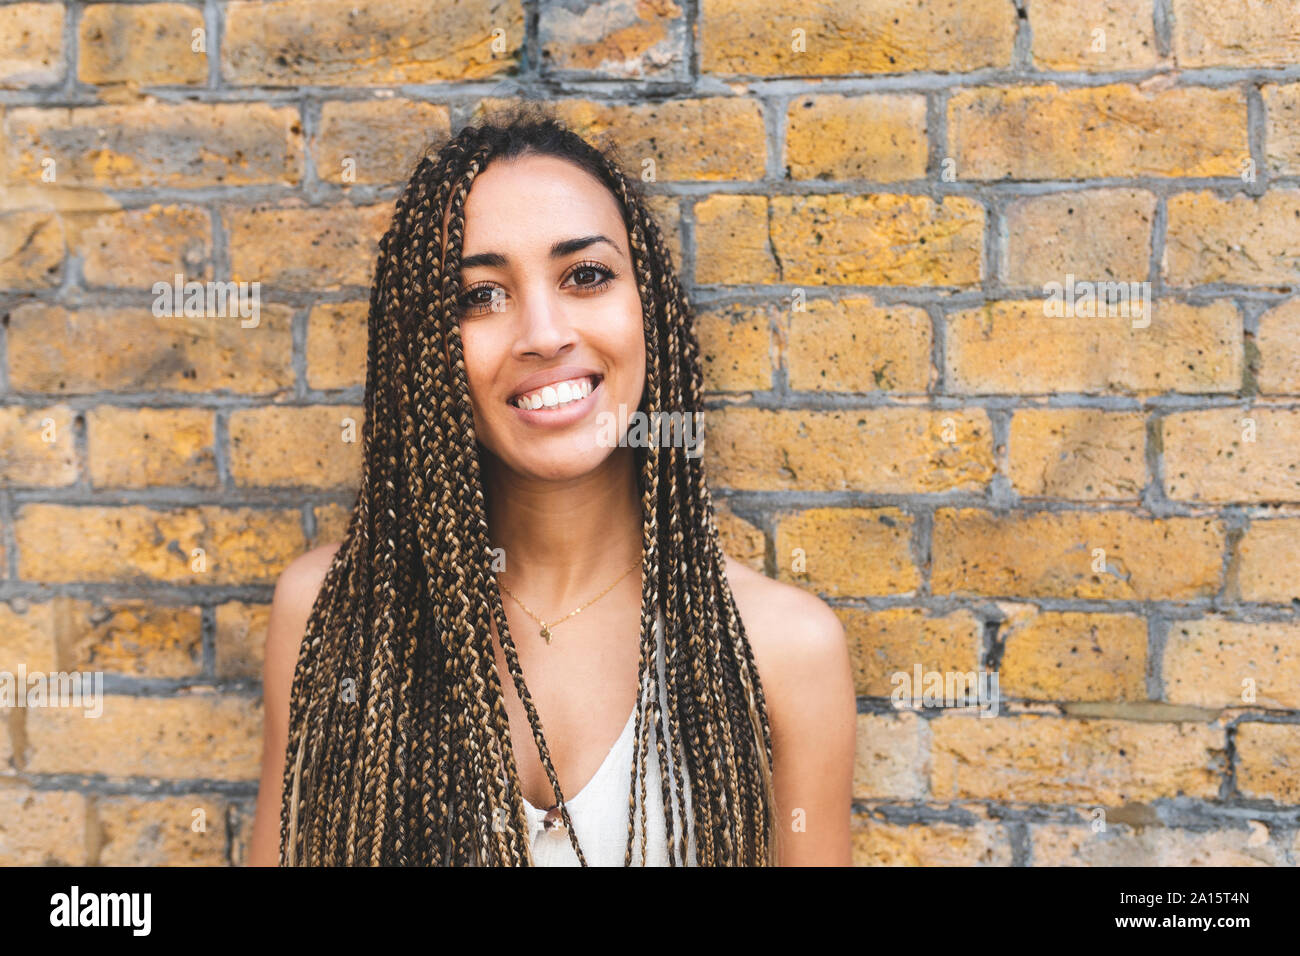 Portrait of happy young woman with long braids in front of brick wall Stock Photo